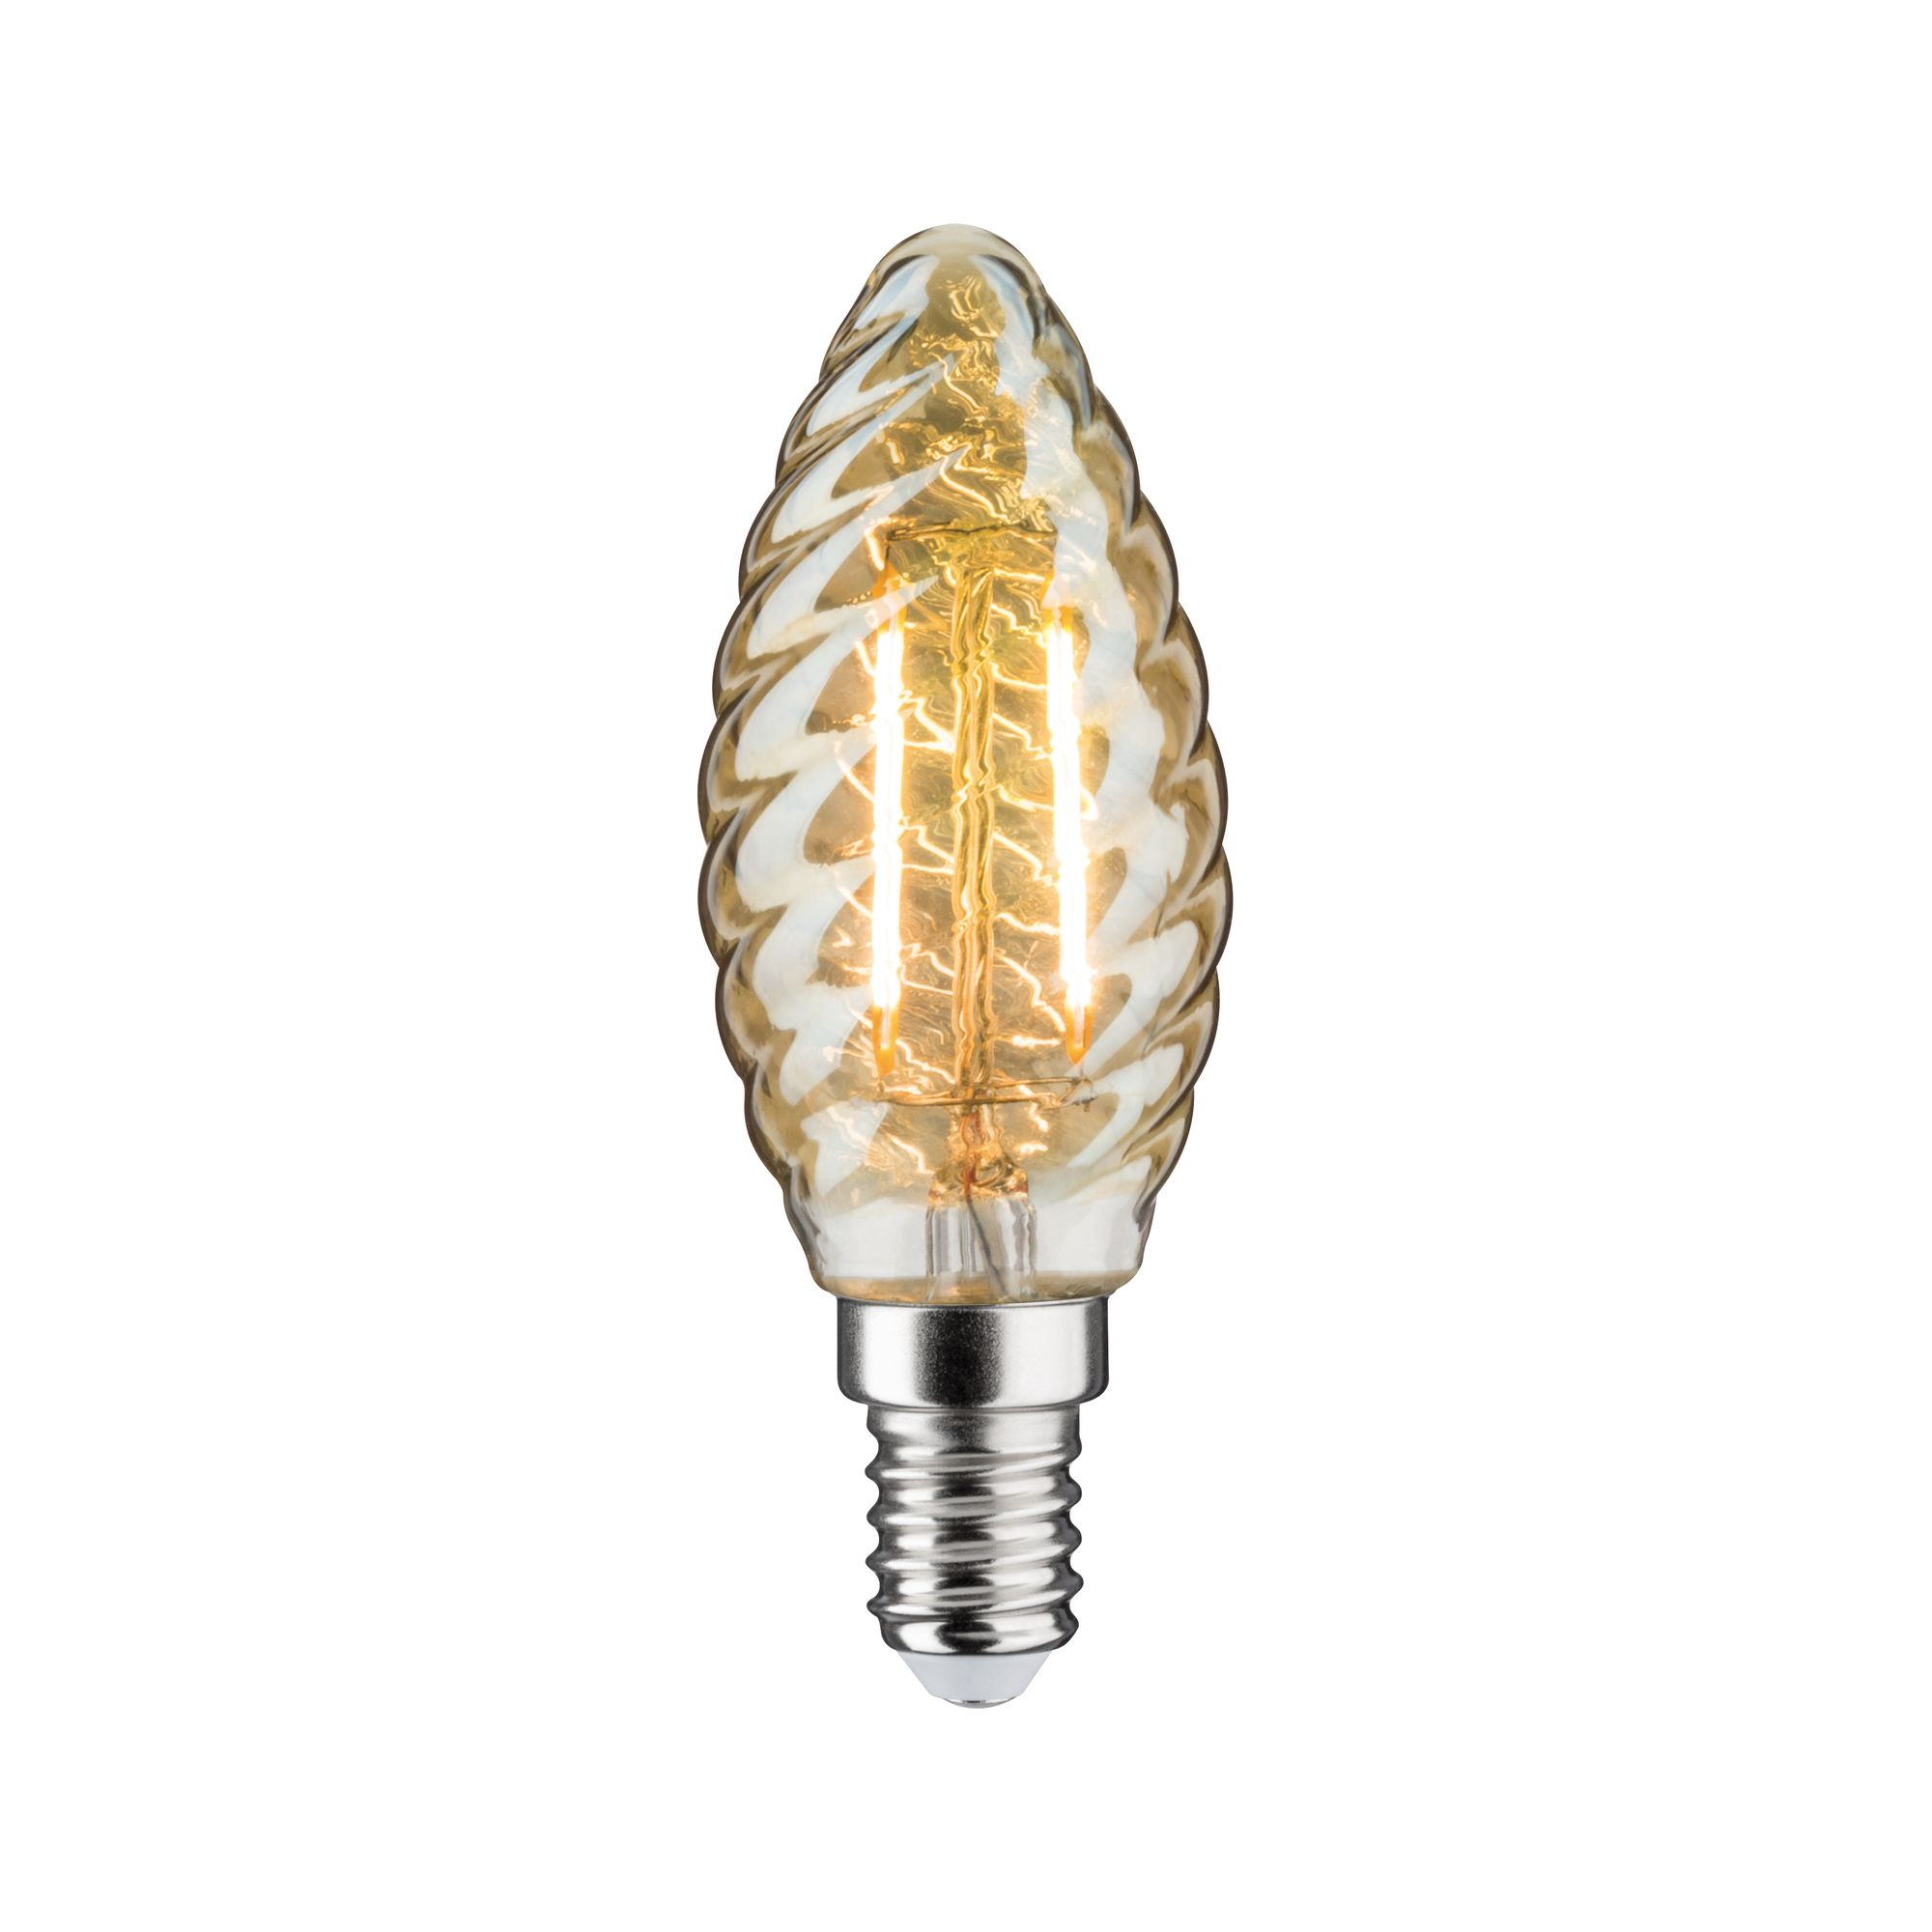 LED-Kerzenlampe E14 4,7W (37W) 430 lm warmgold + product picture